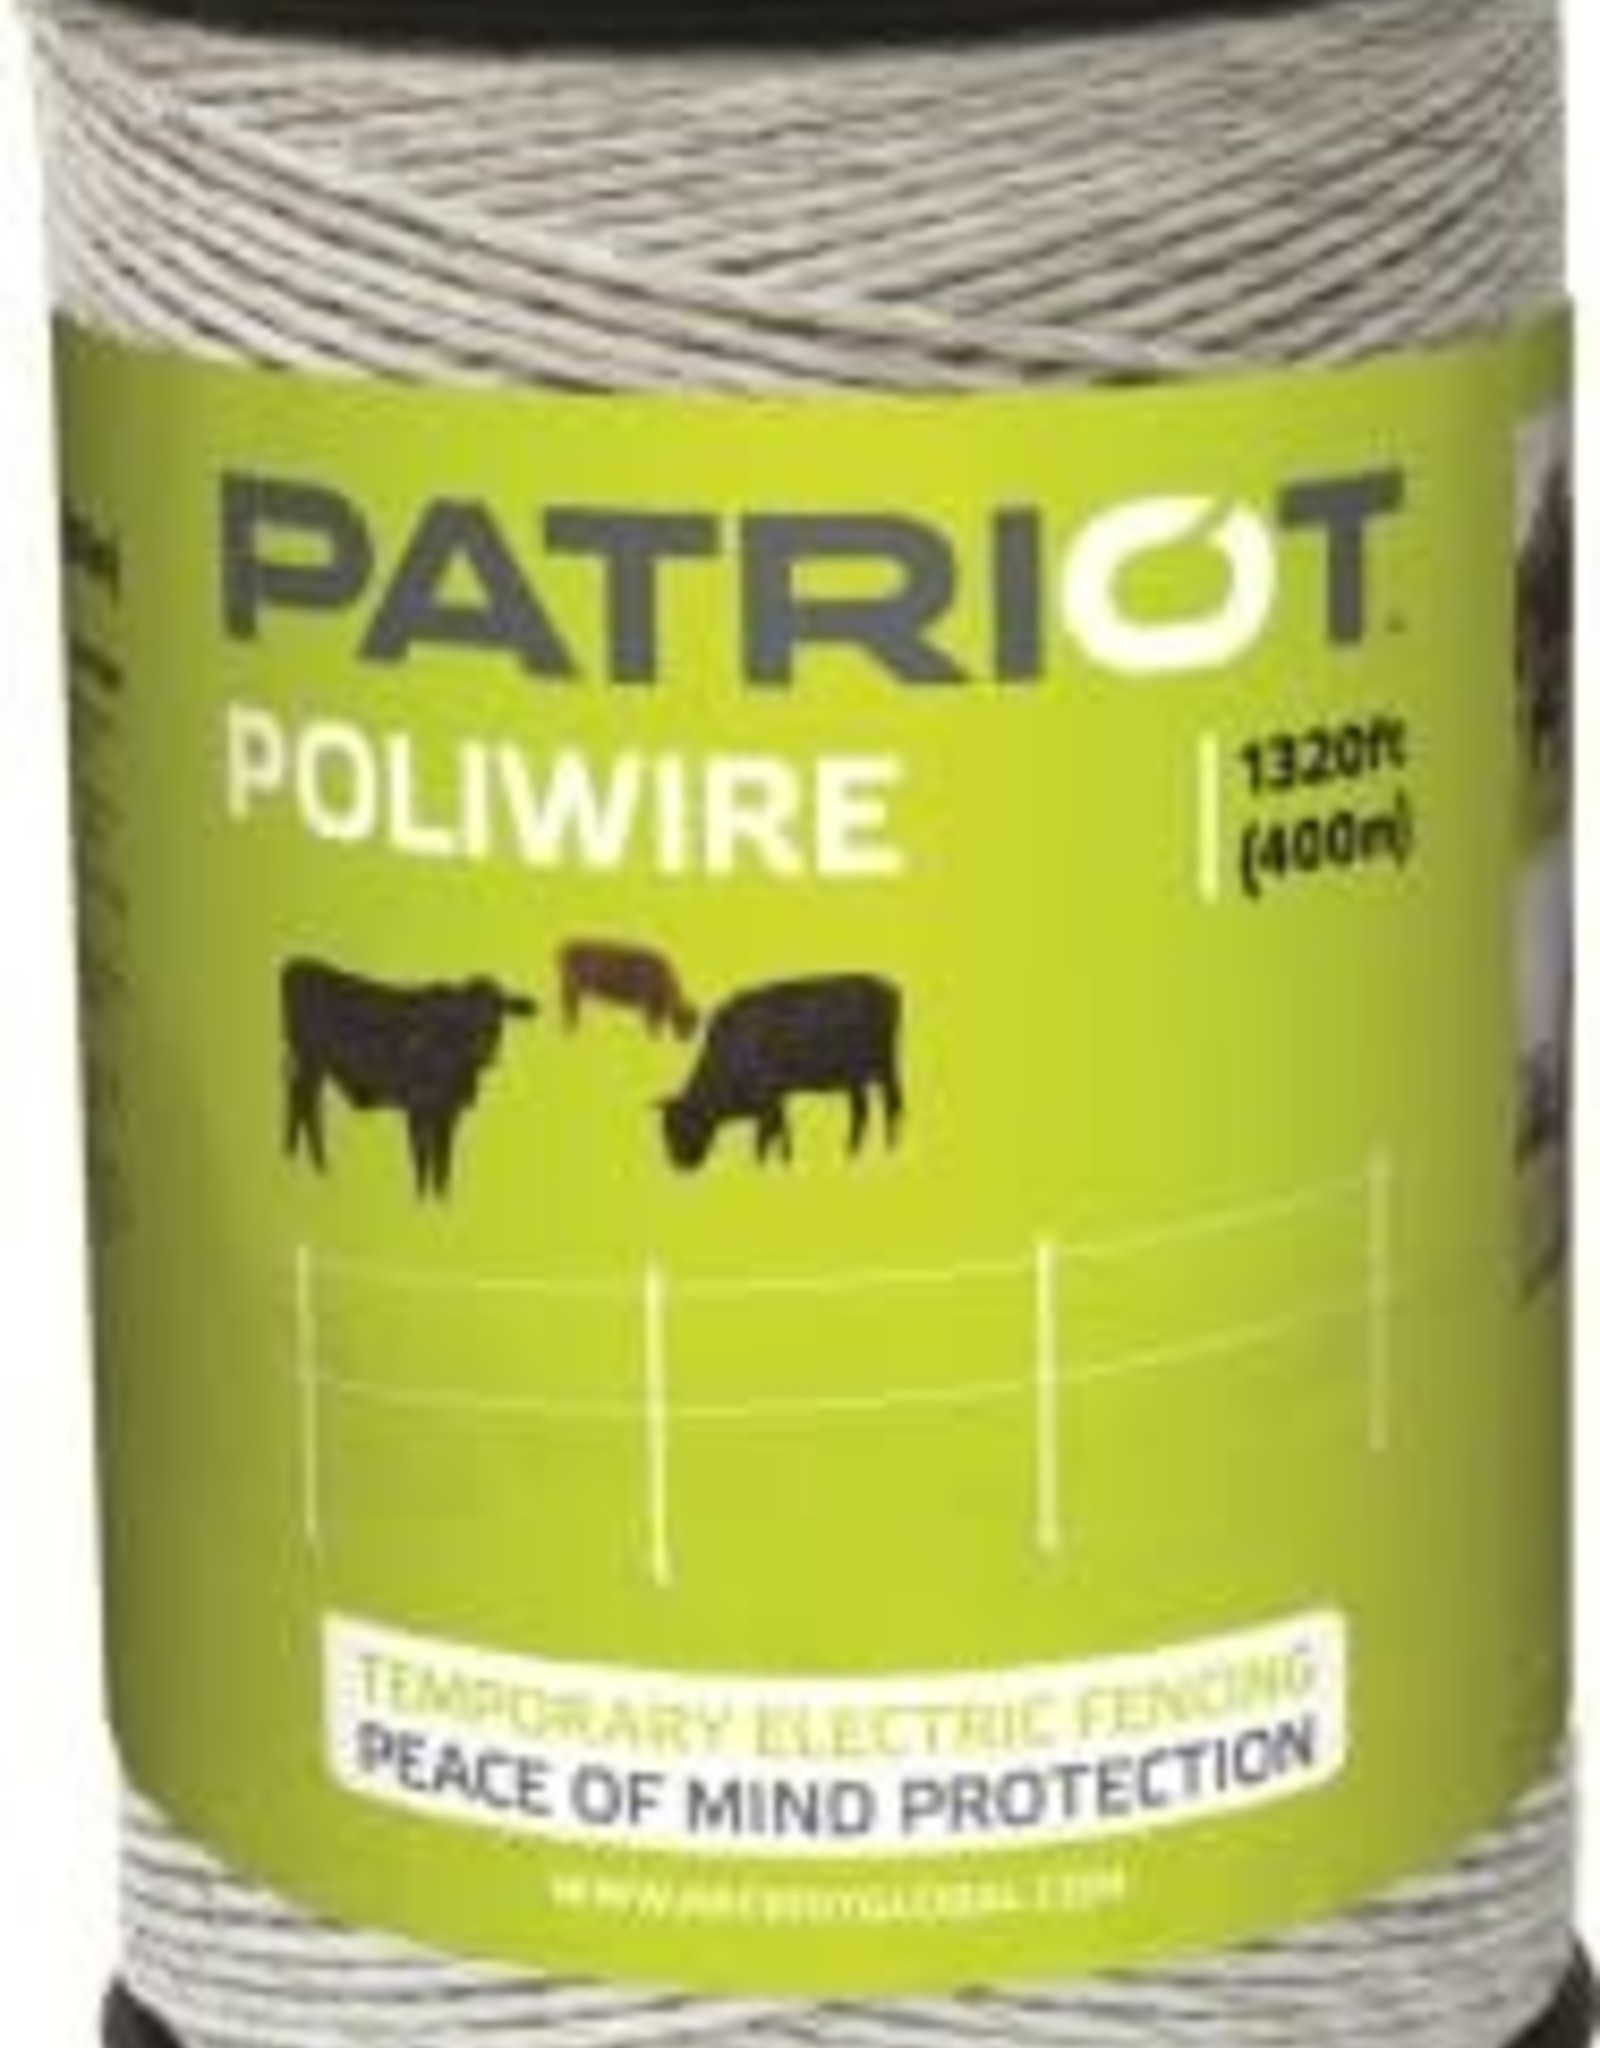 Patriot POLIWIRE Electric Fencing Wire WHITE 1320'